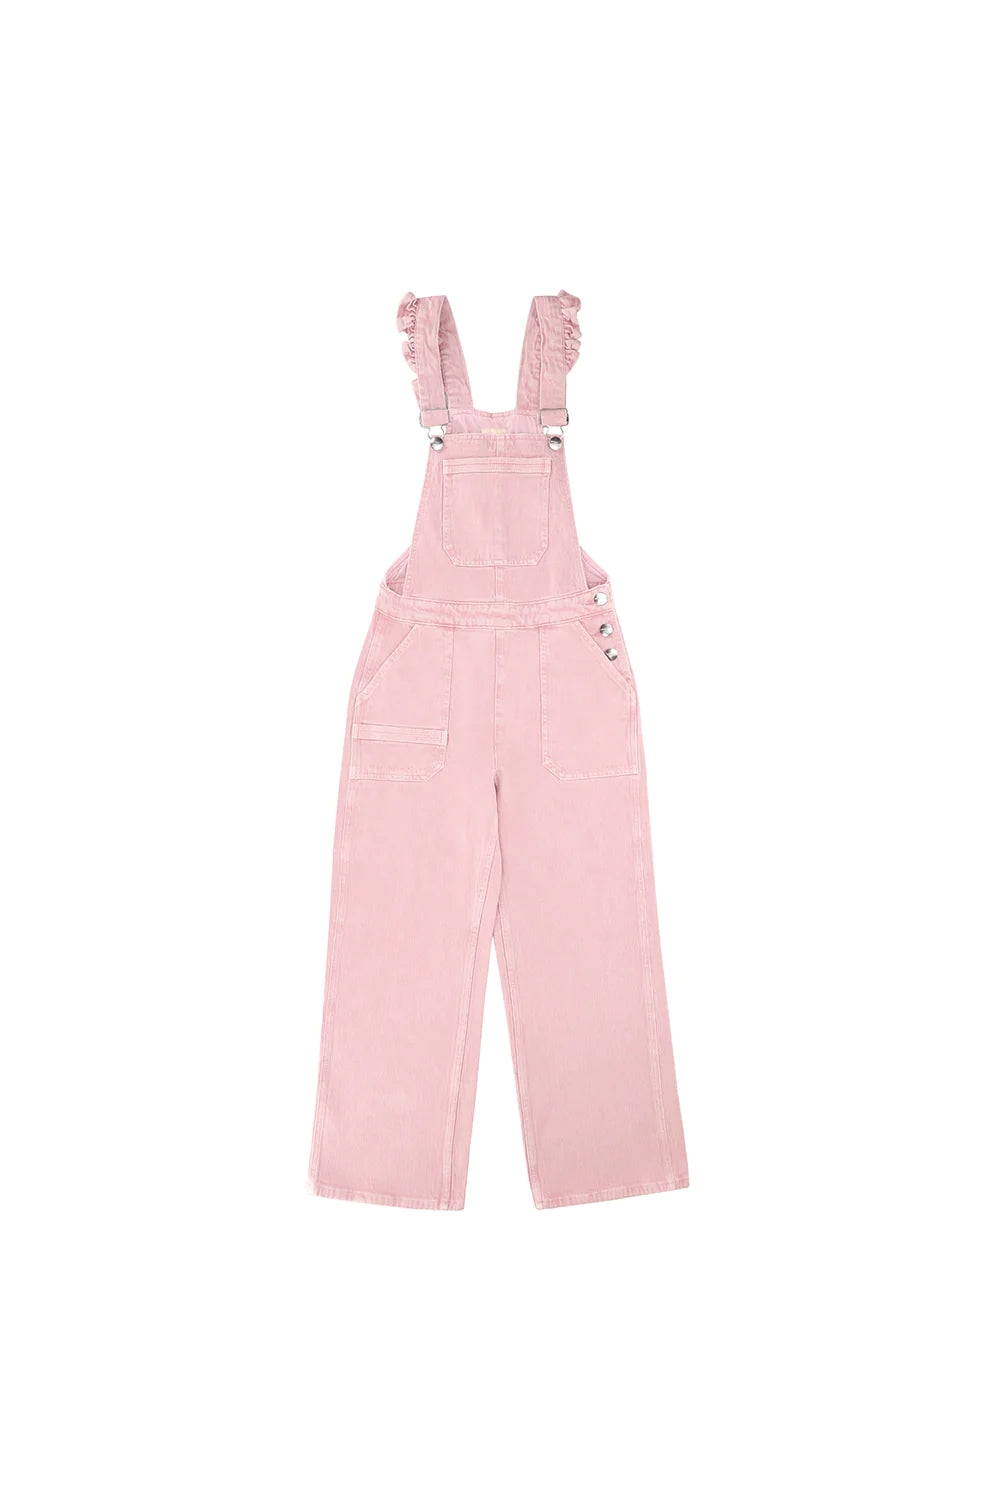 Seventy & Mochi Elodie Frill Dungarees Dusty Rose